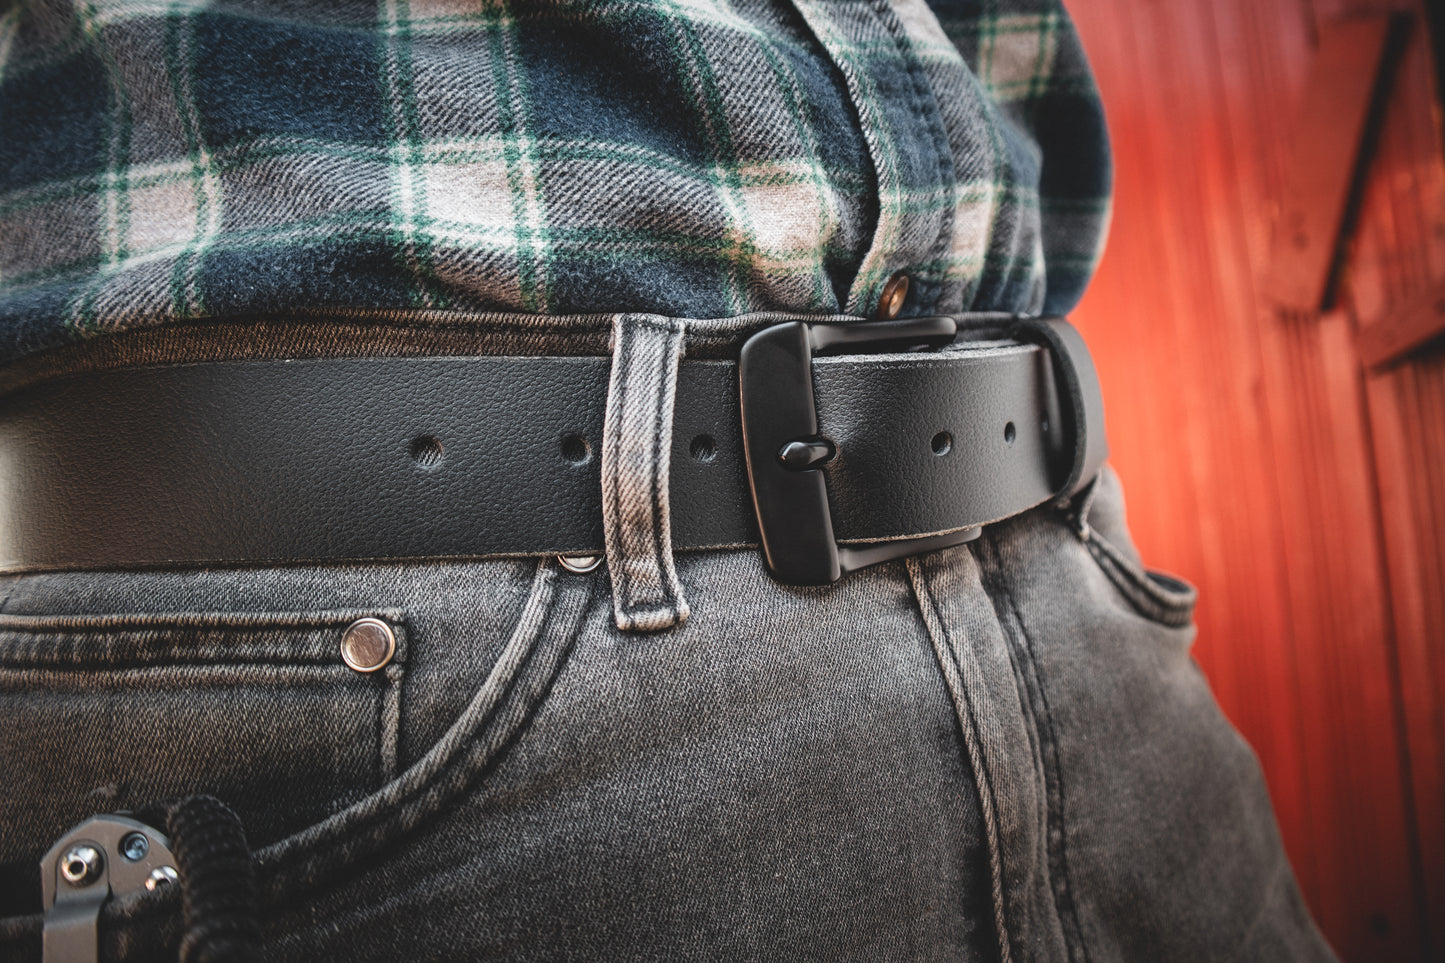 Limited edition! The Black-Out Belt